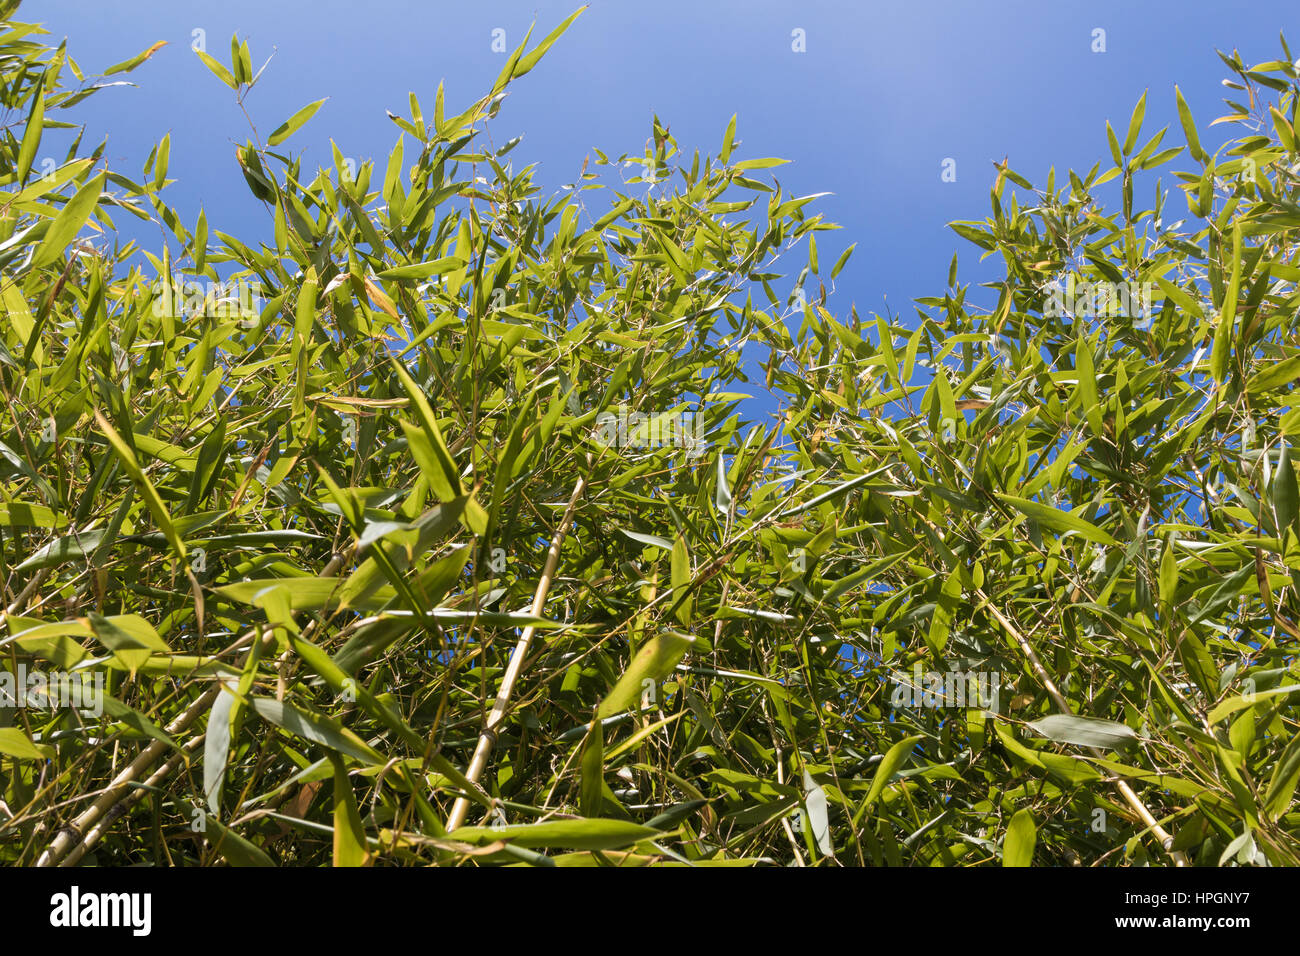 Fresh vivid green bamboo leaves with blue sky as background image Stock Photo